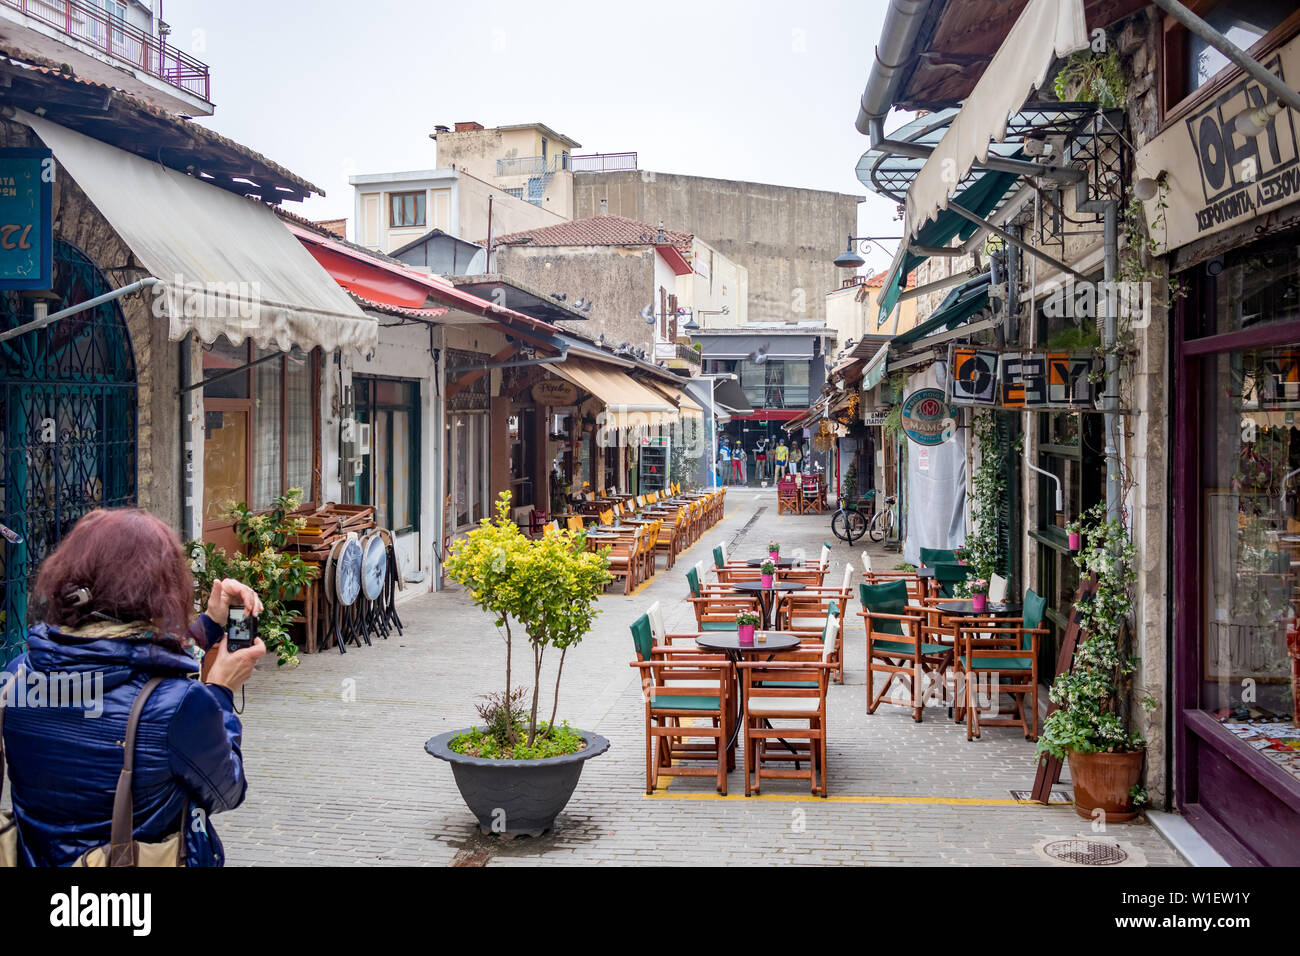 IOANNINA, GREECE - JUNE 6, 2019 - Female photographer with blue jacket takes photos of the empty cafeterias inside the center of the small beautiful old town Stock Photo